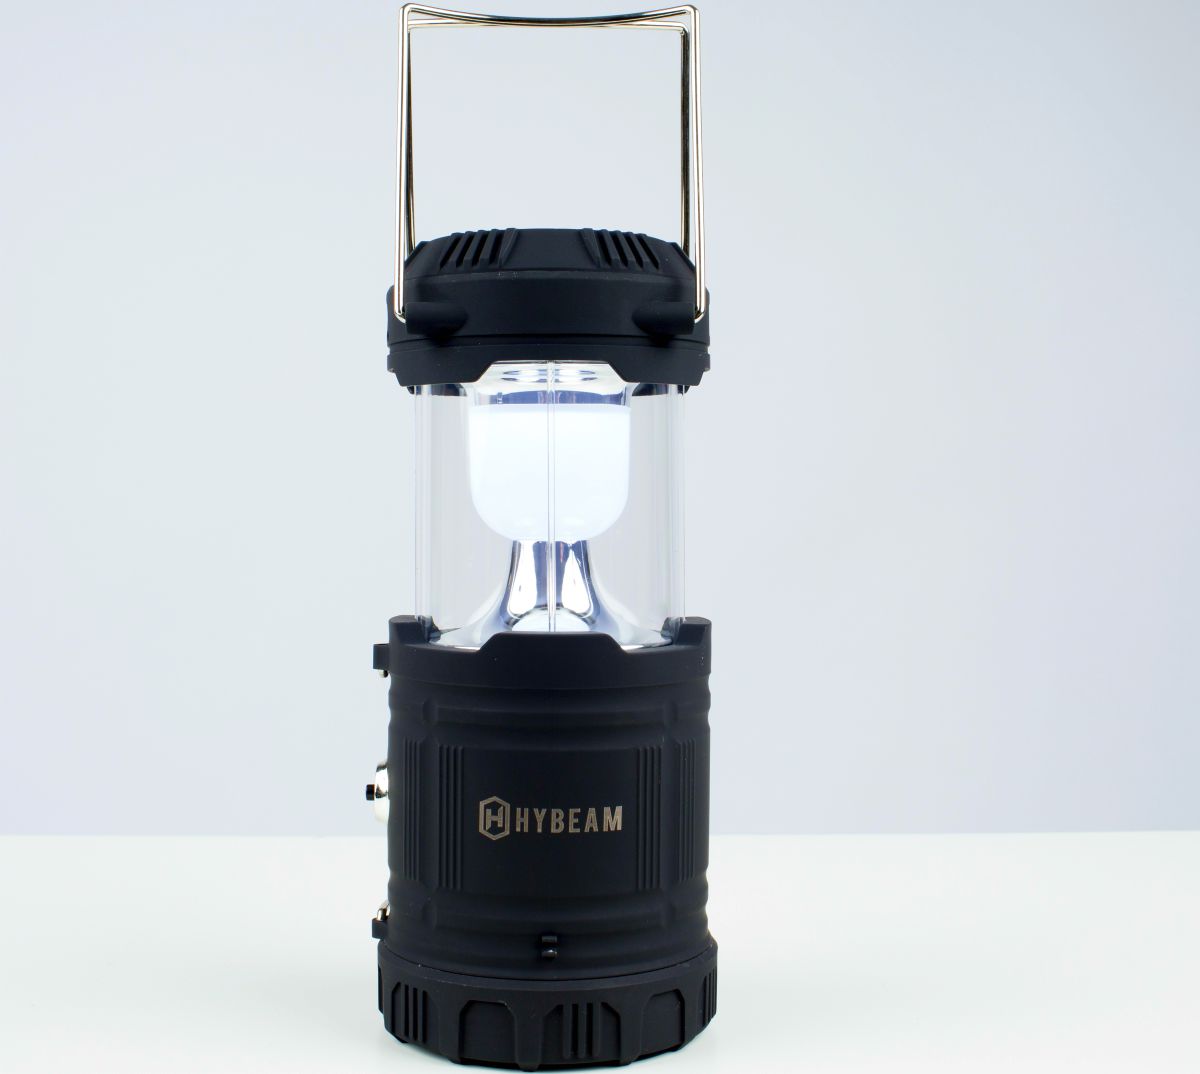 Hybeam solar lamp | Tips For Sheltering In Place